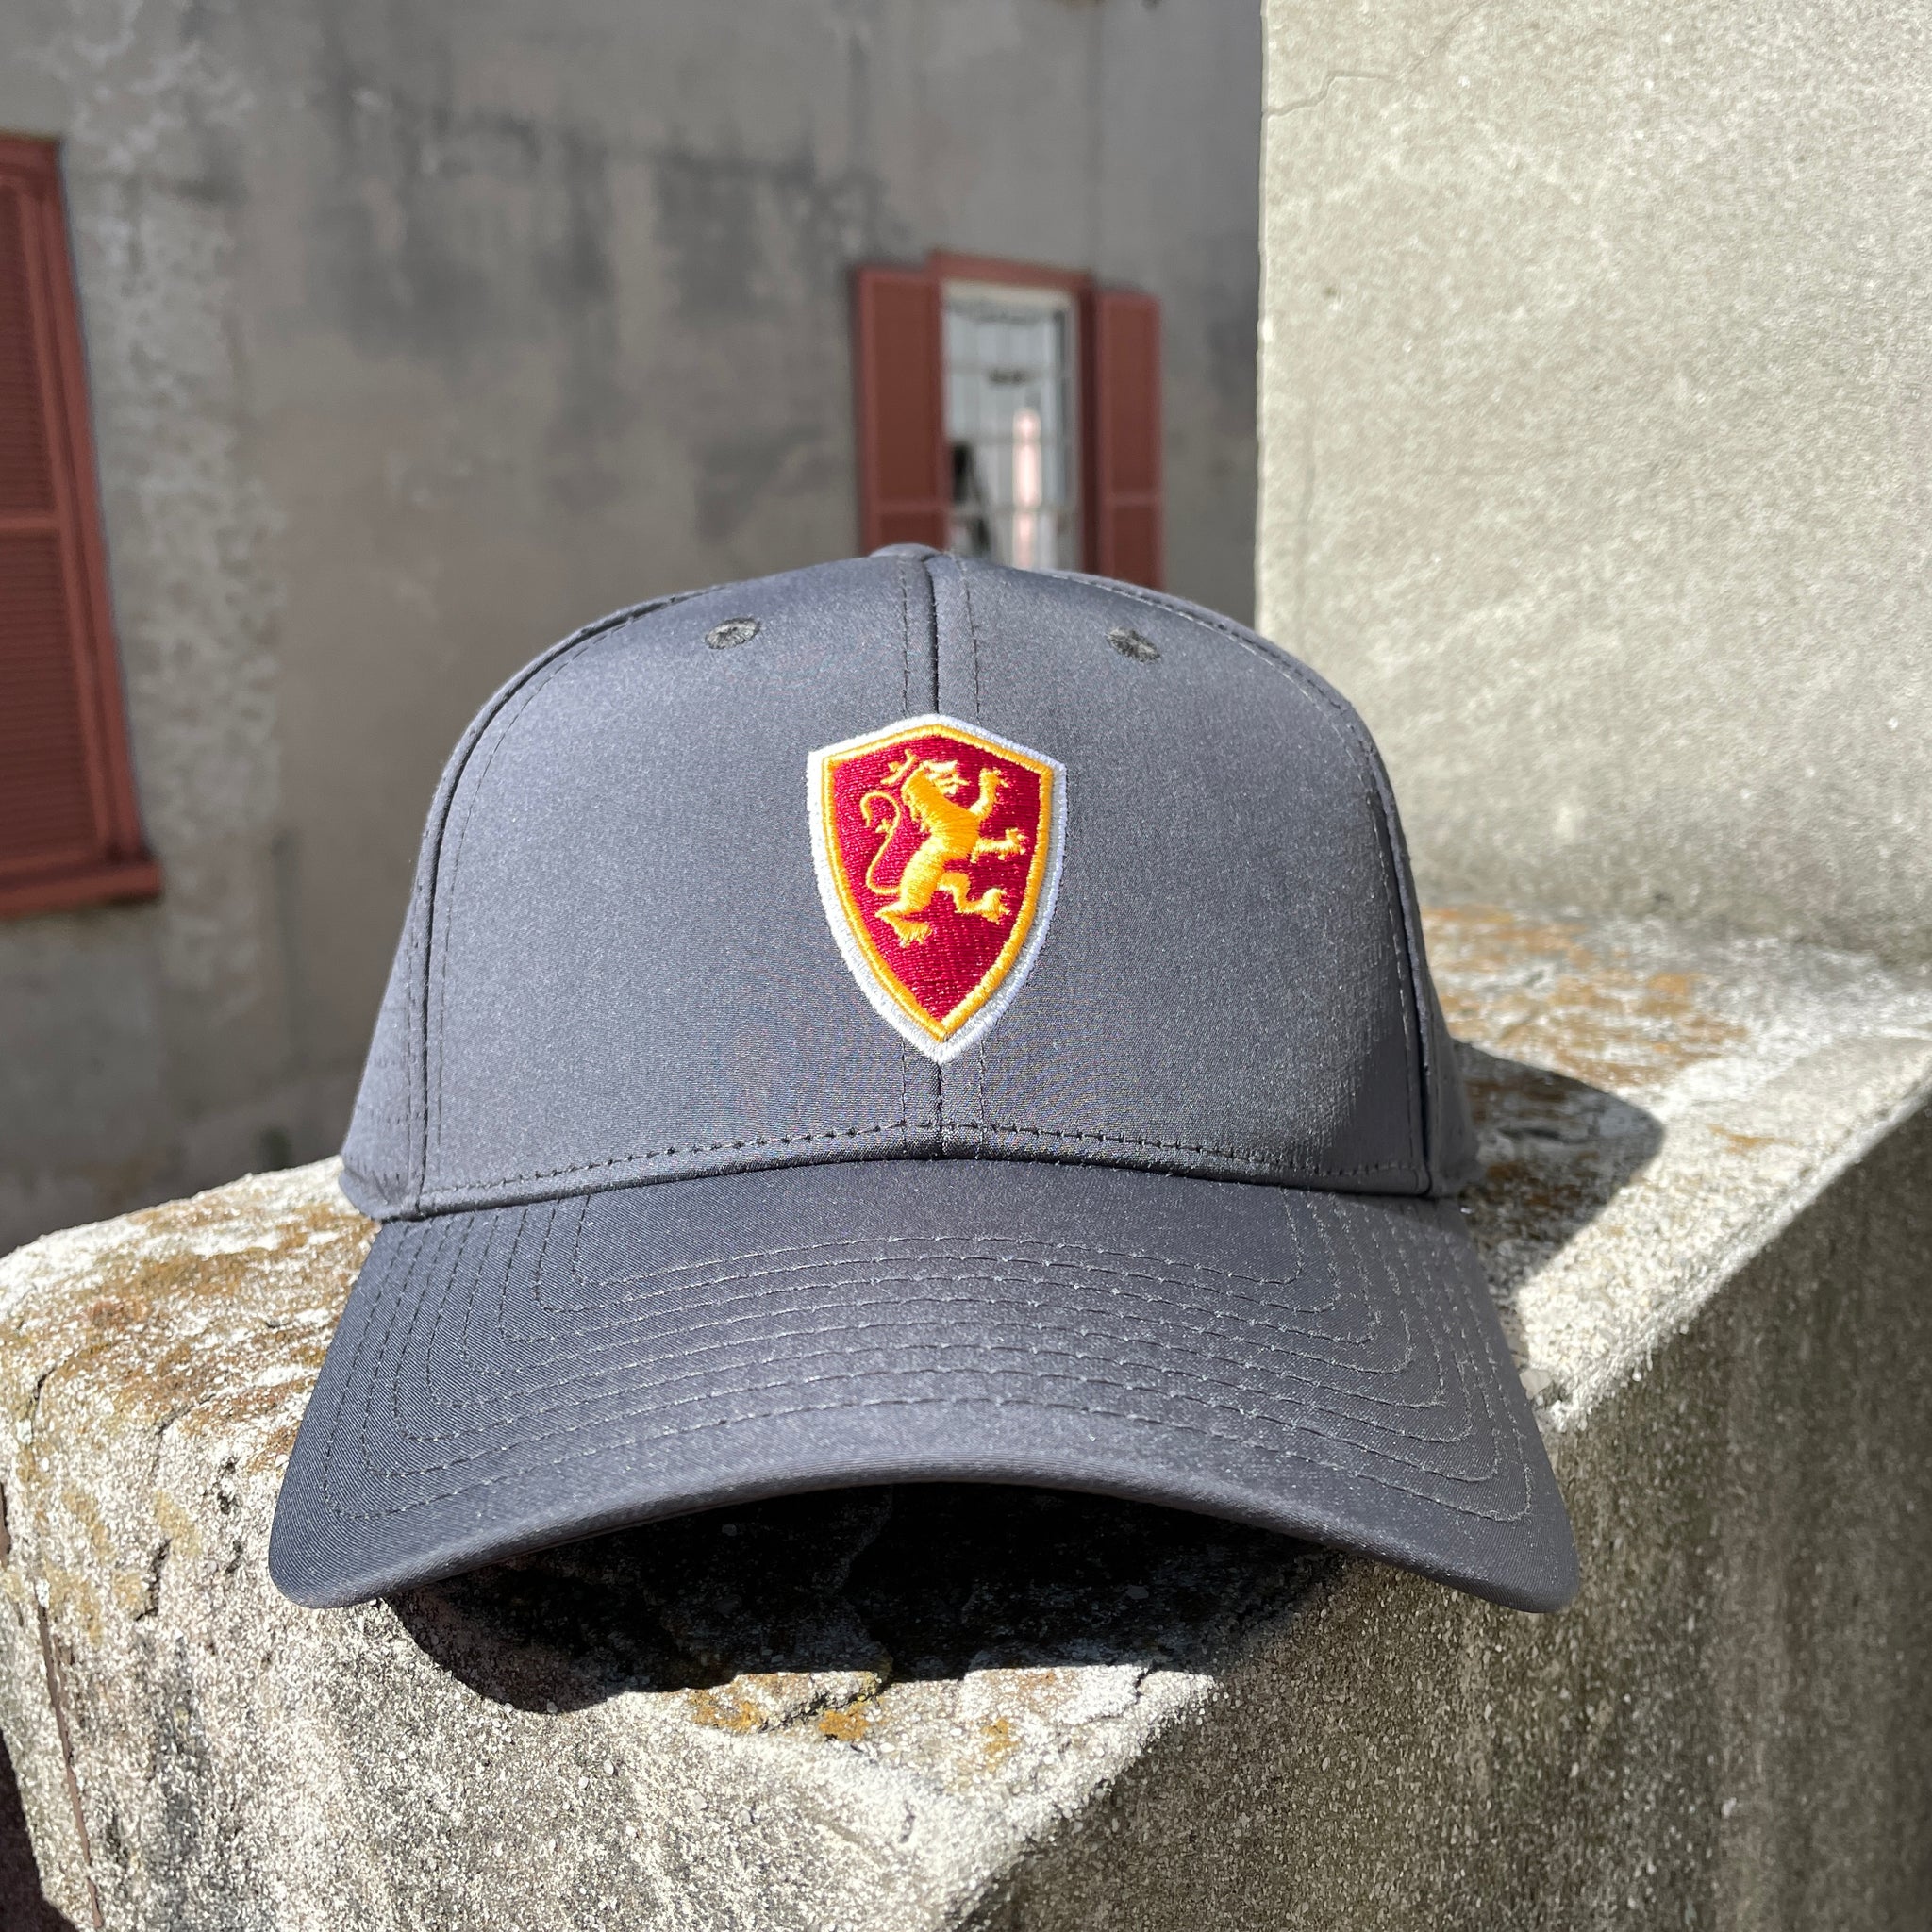 Grey hat with side perforations and Flagler College shield logo in middle